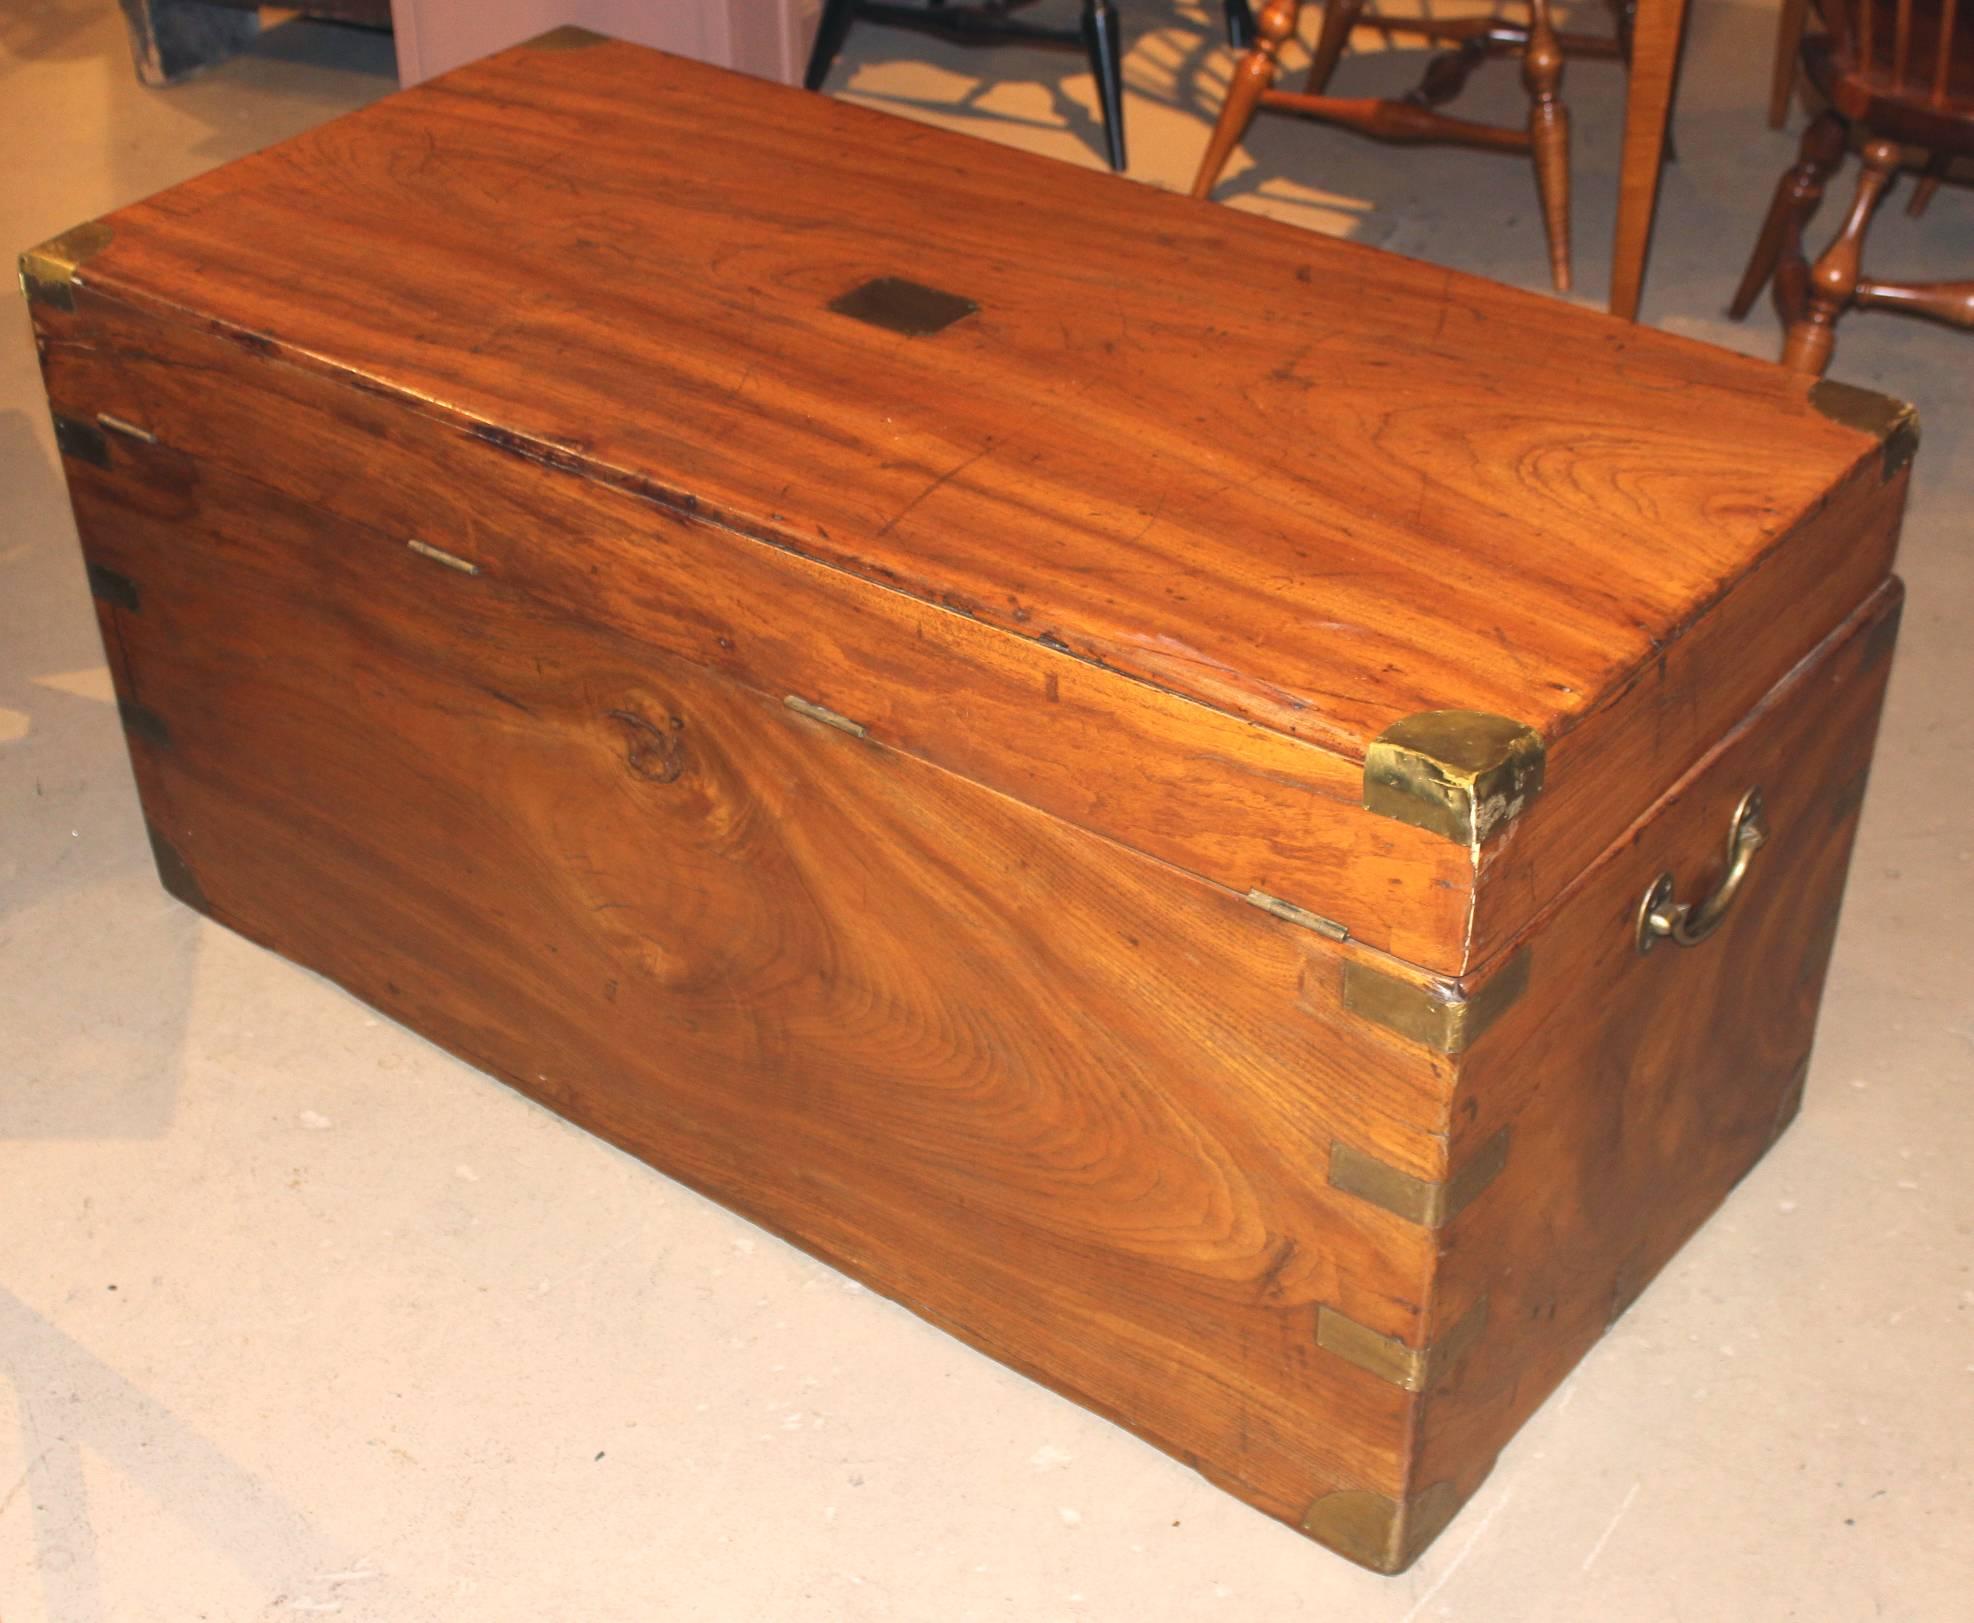 Chinese China Trade Camphor Wood Trunk or Campaign Chest, circa 1800